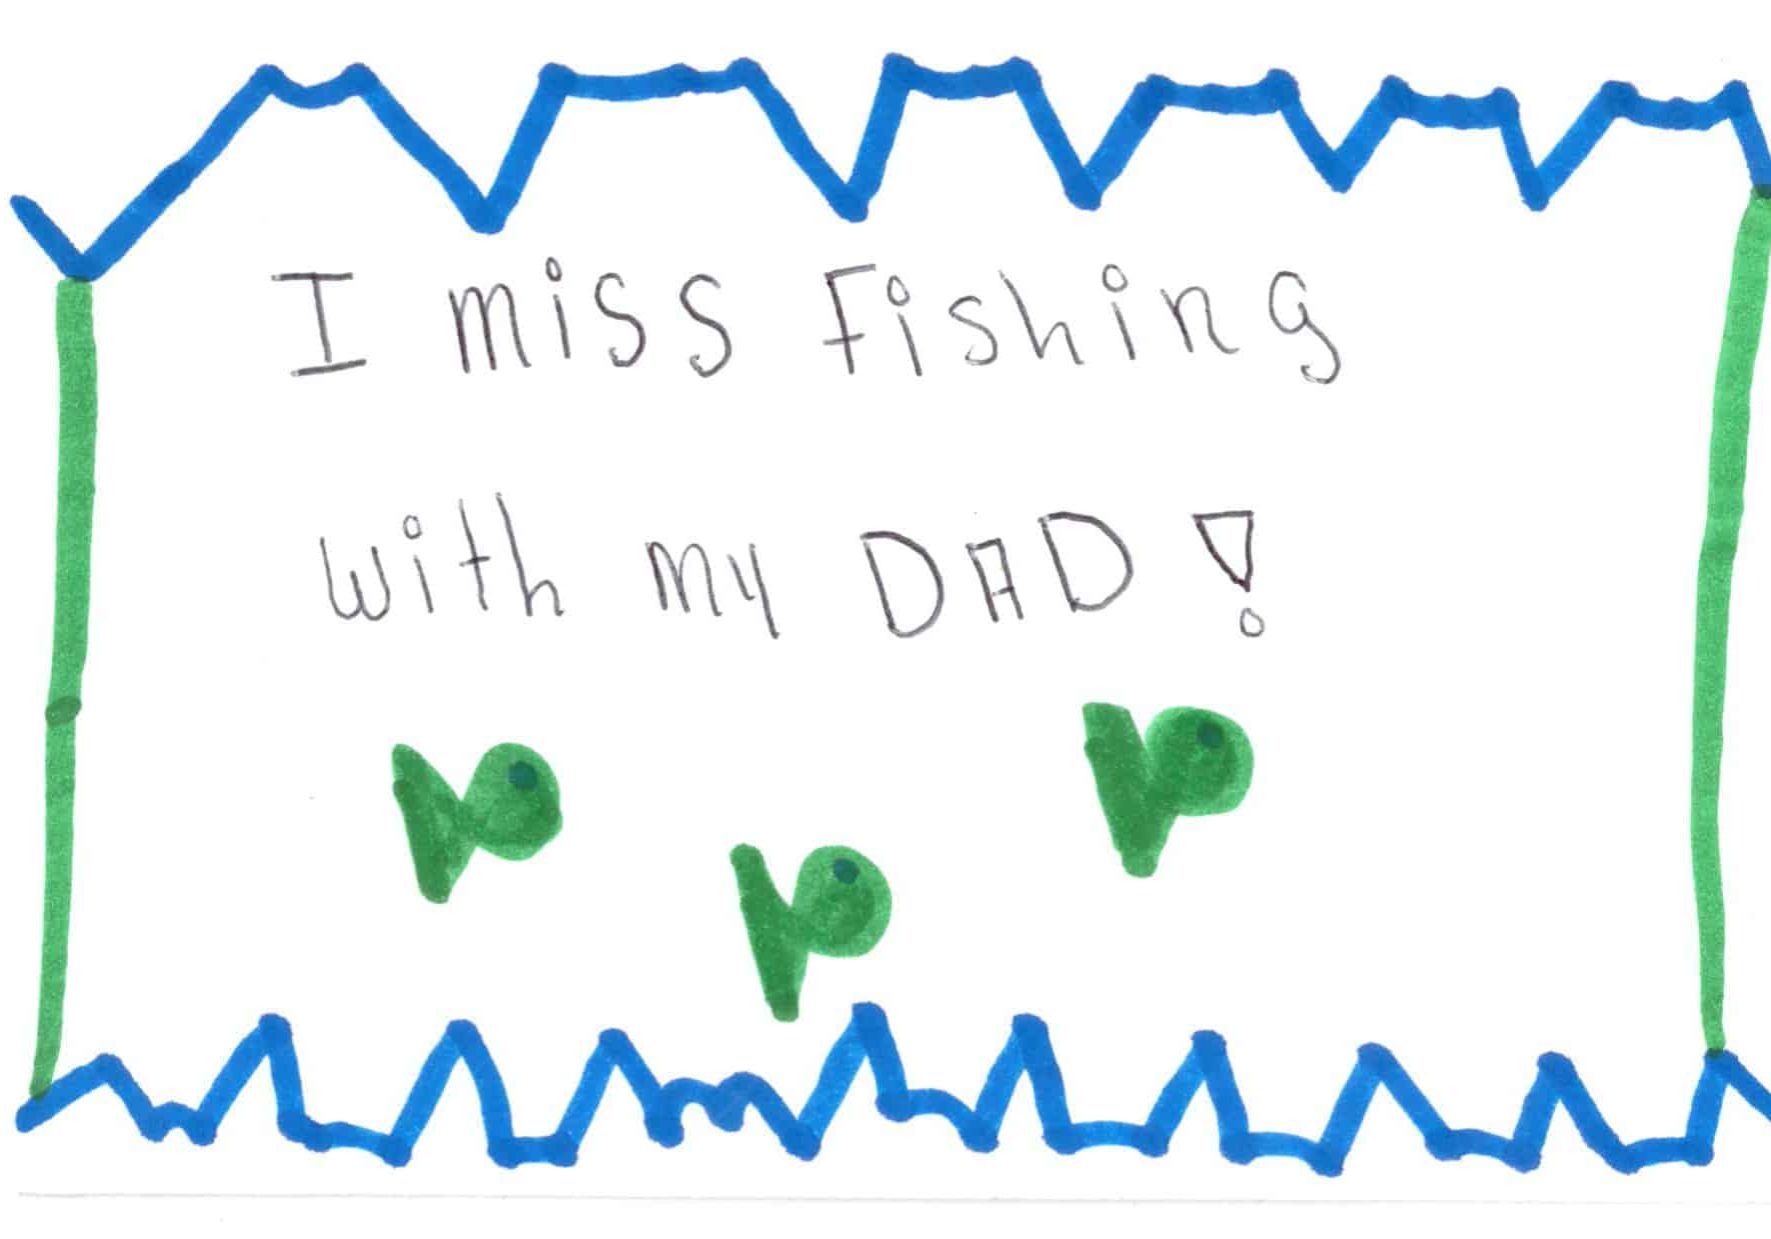 A WARM Place child shares a memory they miss about their dad.